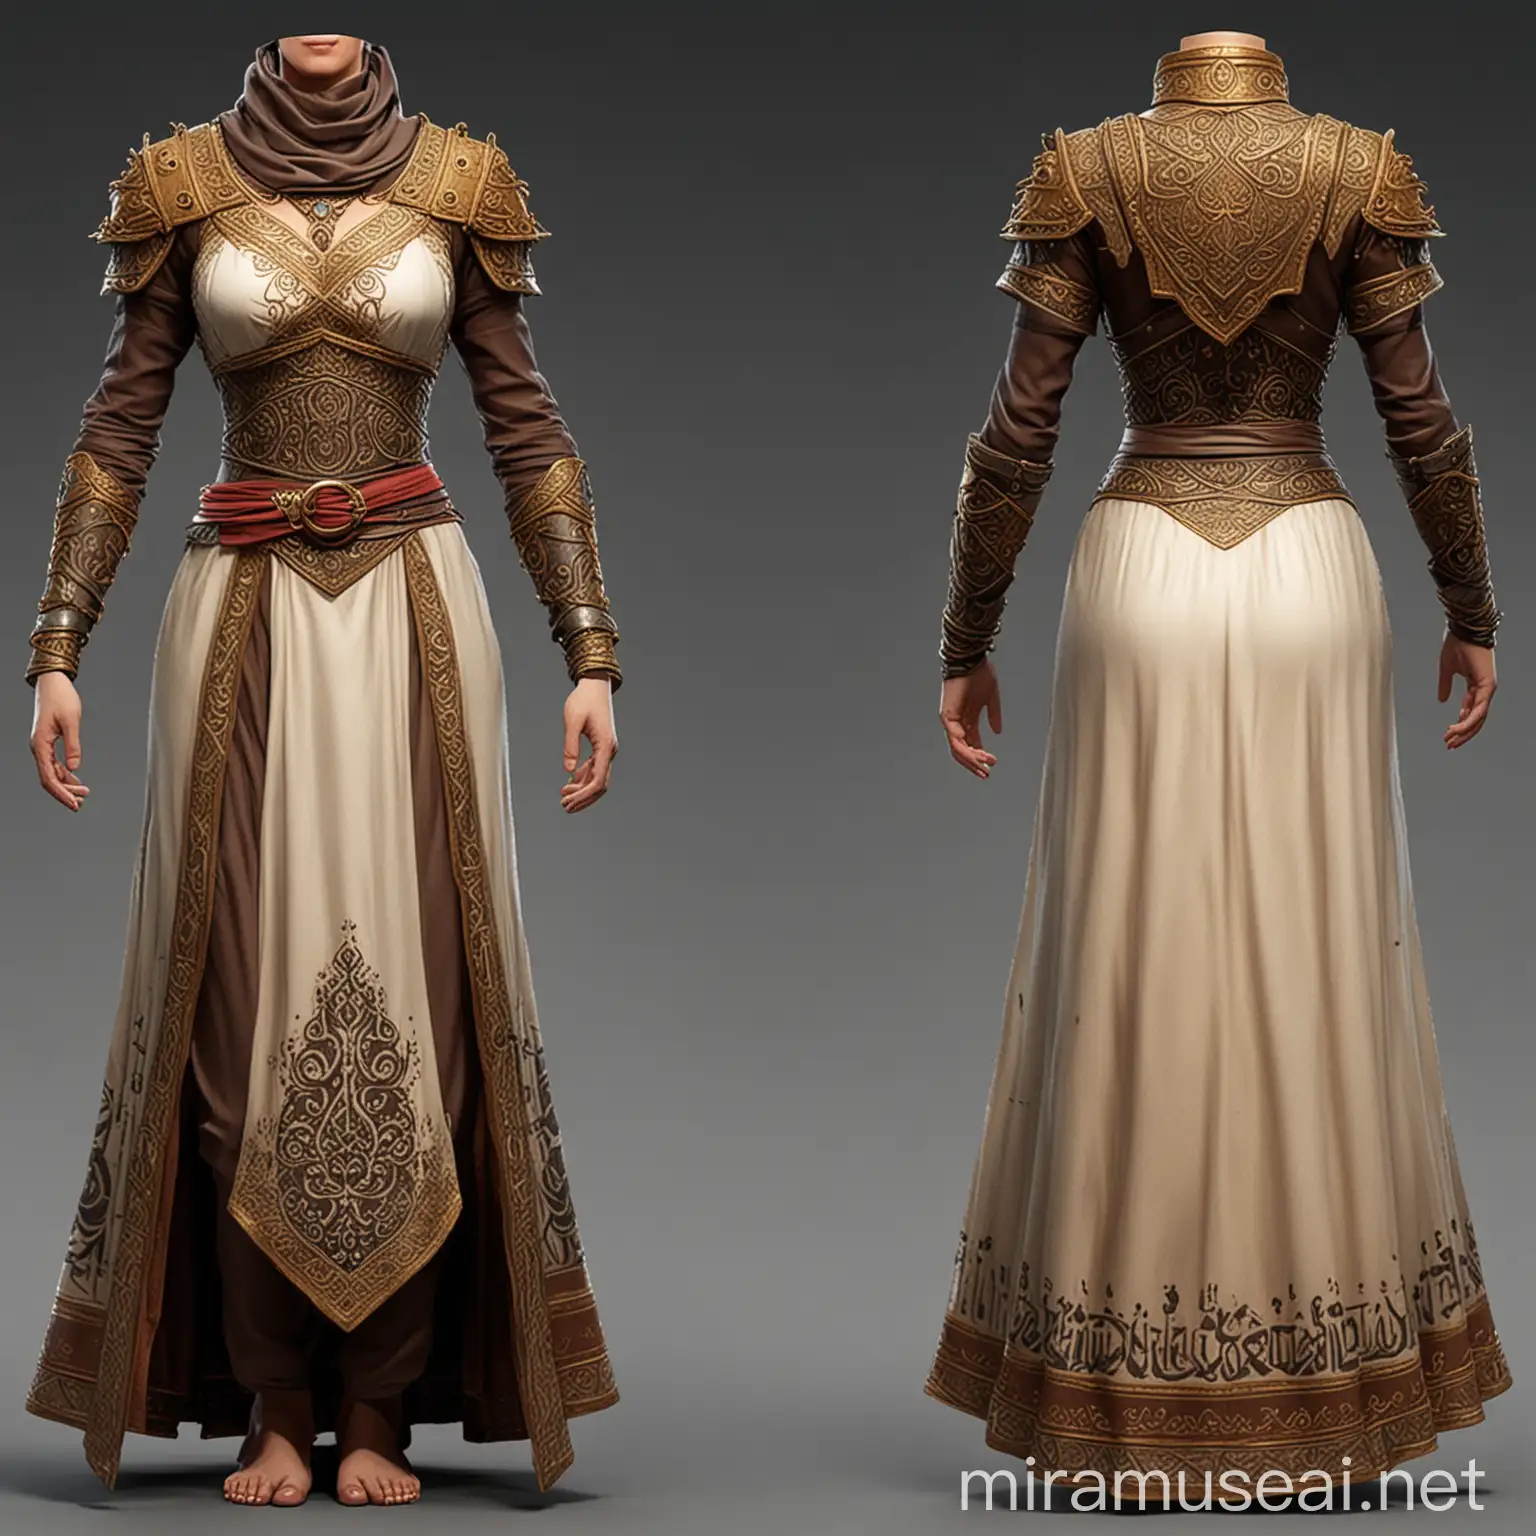 A dress for battle royal game design based on Arabic theme front view back view and details